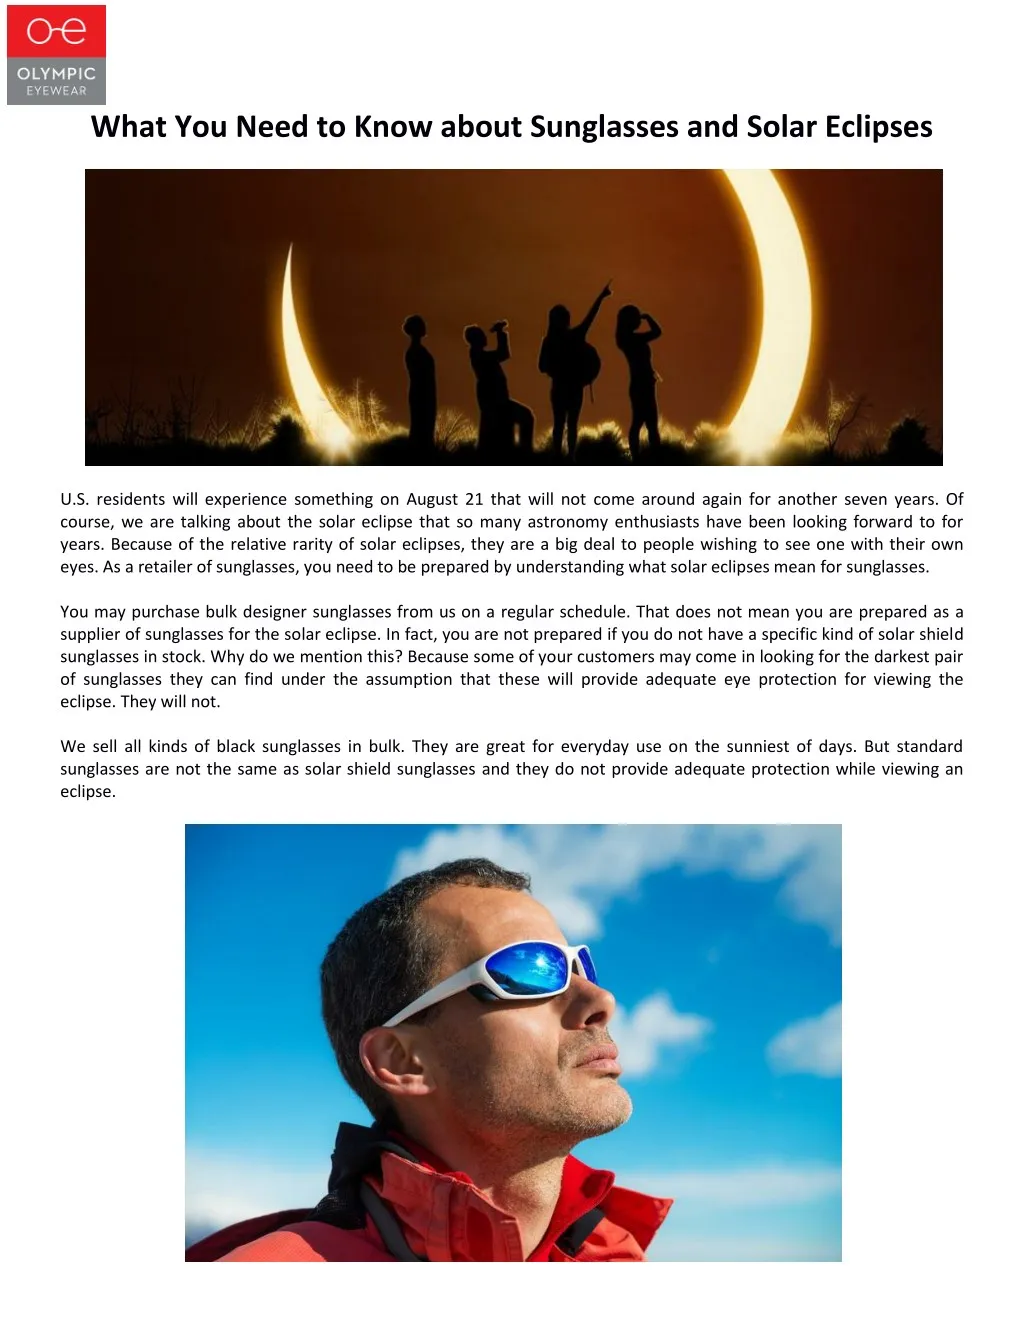 what you need to know about sunglasses and solar